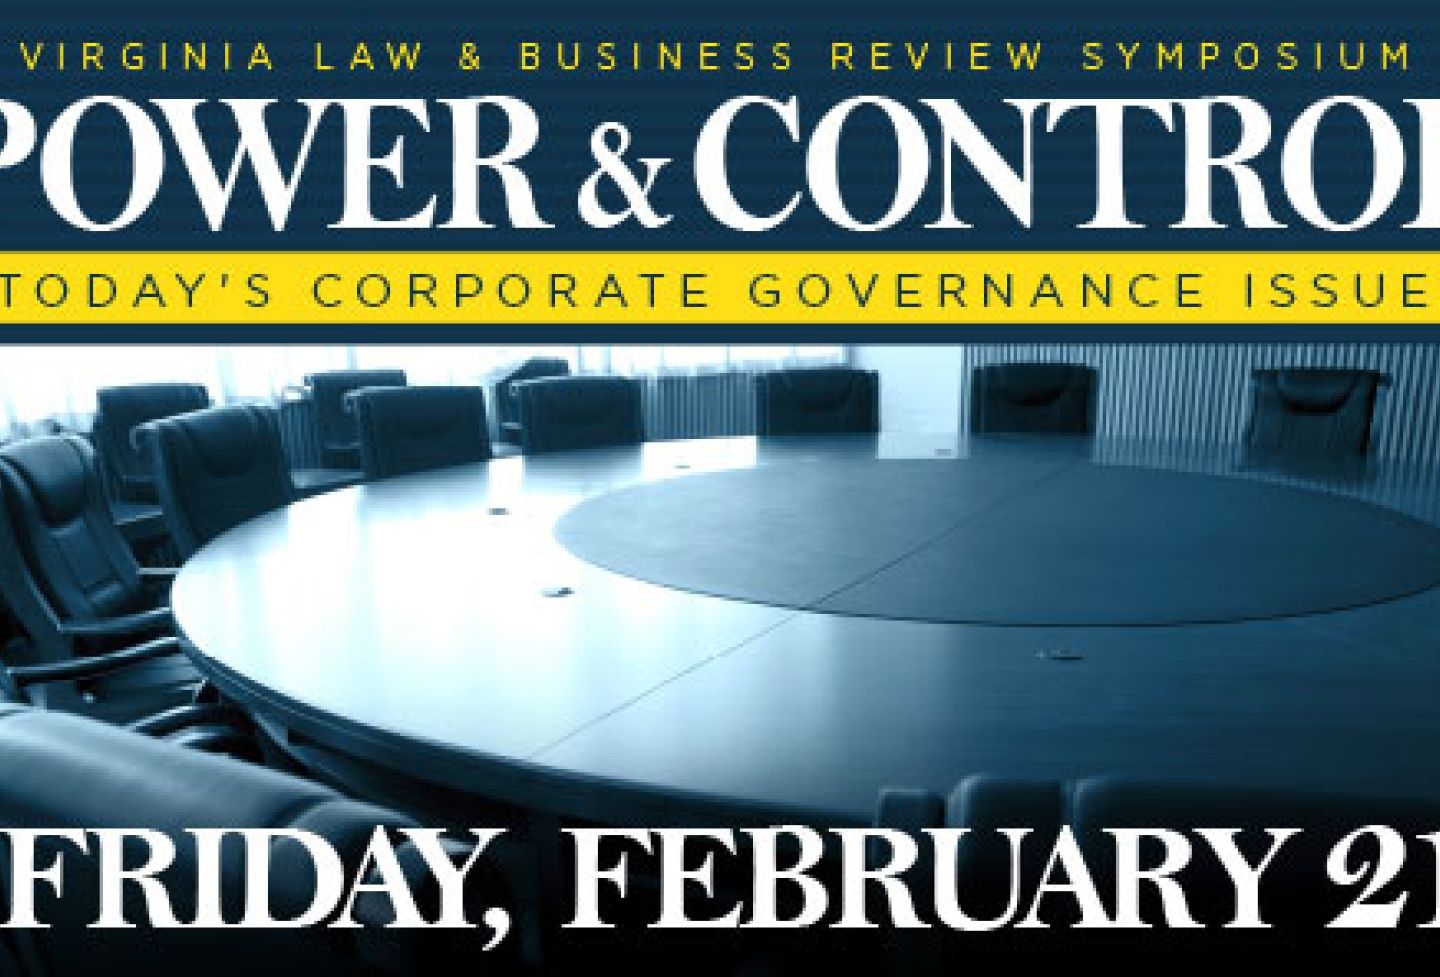 Power & Control - Virginia Law & Business Review Symposium